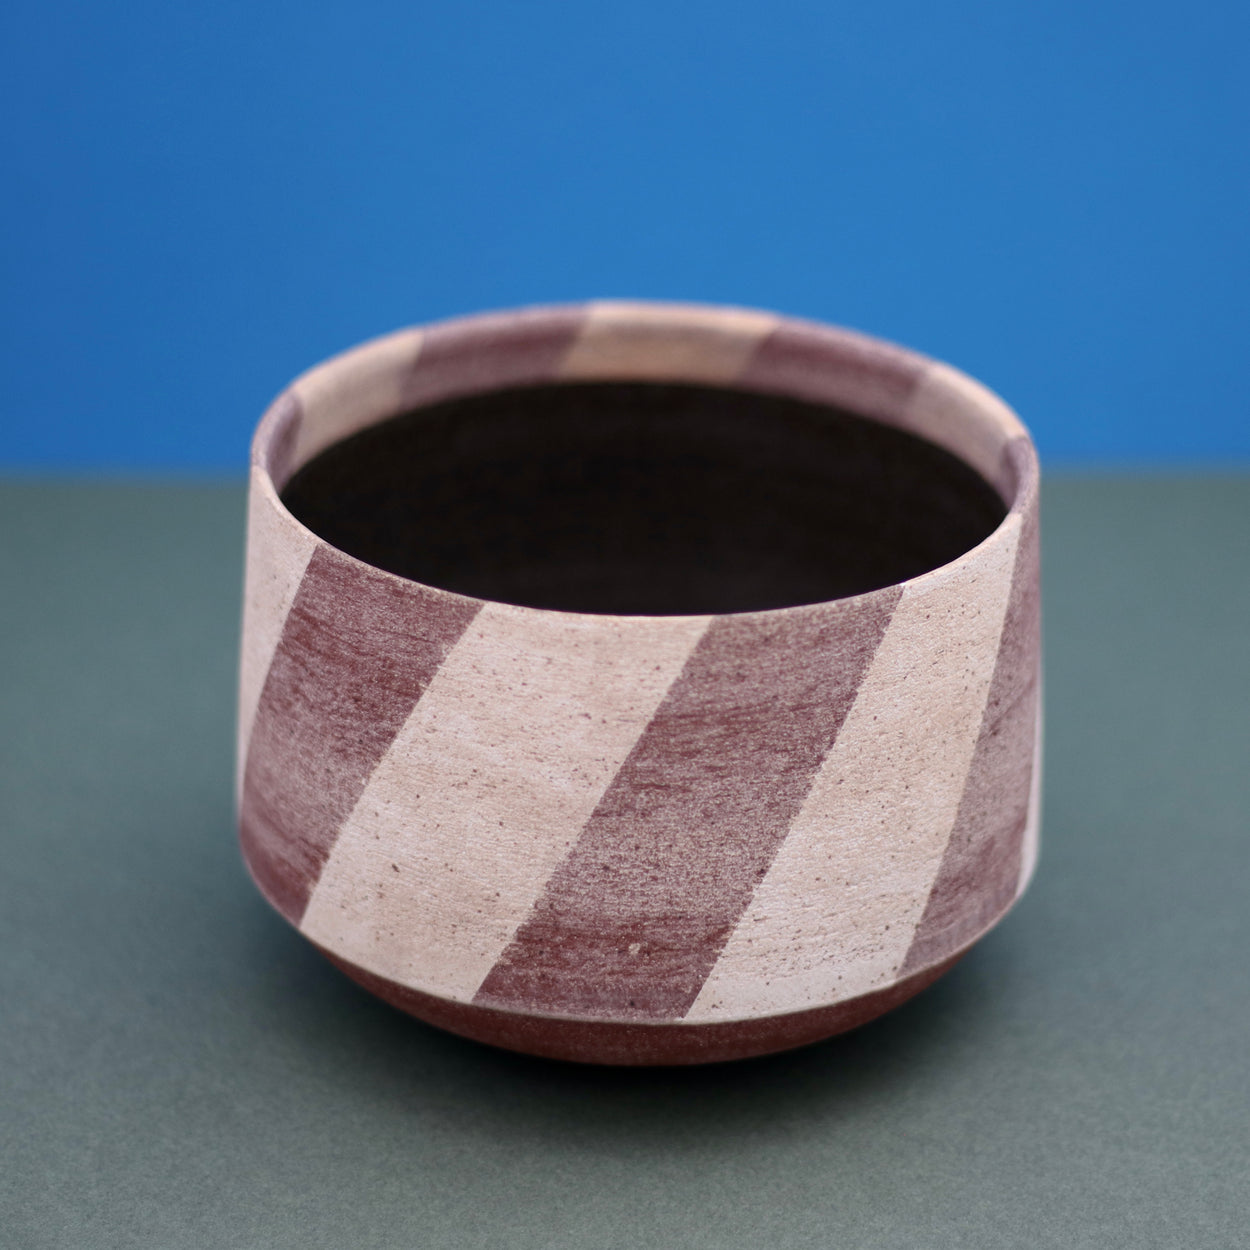 Ceramic Medium Stripe Bowl by Amanda-Sue Rope with blue green background. Top angle view.